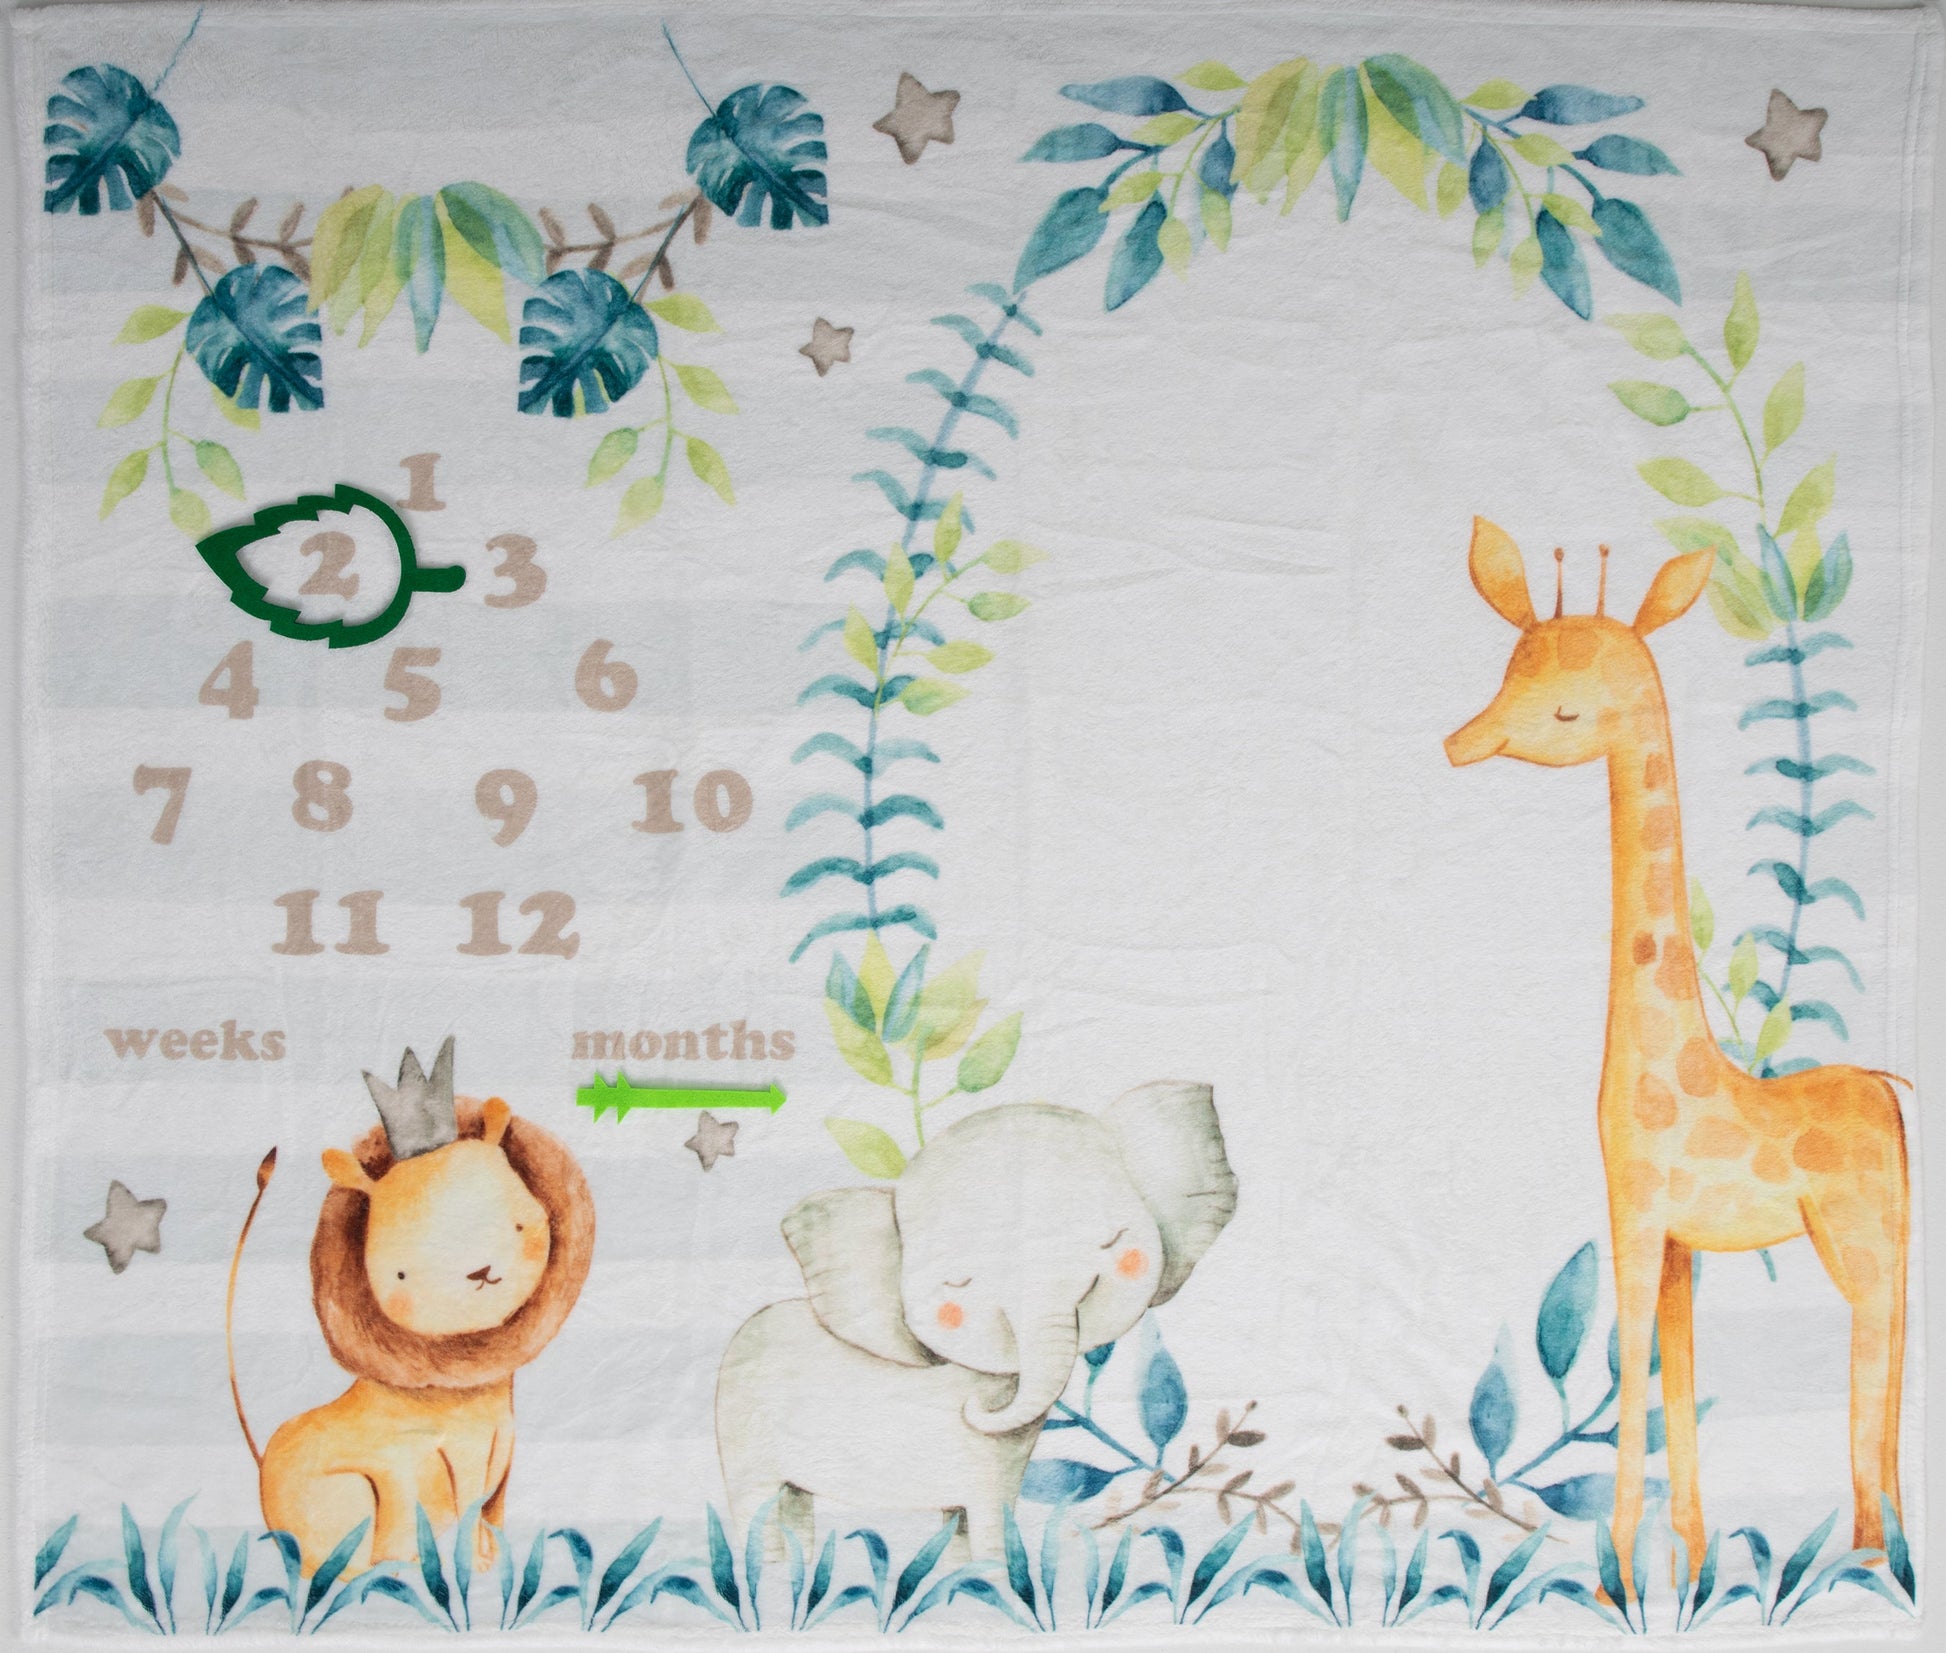 Capture your baby's growth and development with our soft and cozy wild life wonders safari animals milestone blanket. It's perfect for monthly photos to track your little one's growth and create cherished keepsakes. Crafted from high-quality, soft fabric, our Milestone Blanket provides a comfortable and durable backdrop for your baby's milestone photoshoots. It's designed to withstand the countless moments of wonder and exploration it will witness.